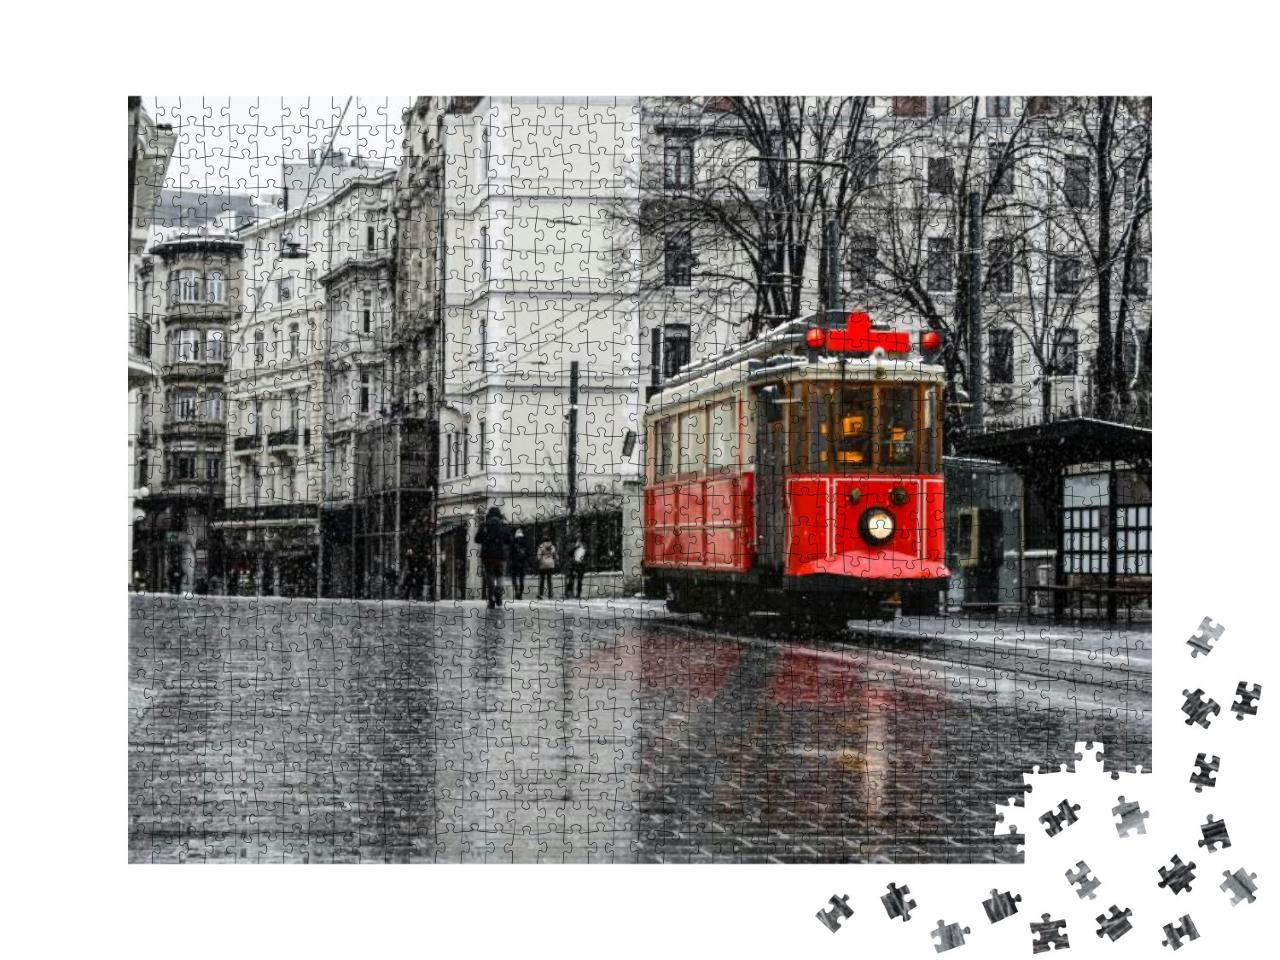 Red Nostalgic Tram is Moving on the Istiklal Street in Wi... Jigsaw Puzzle with 1000 pieces